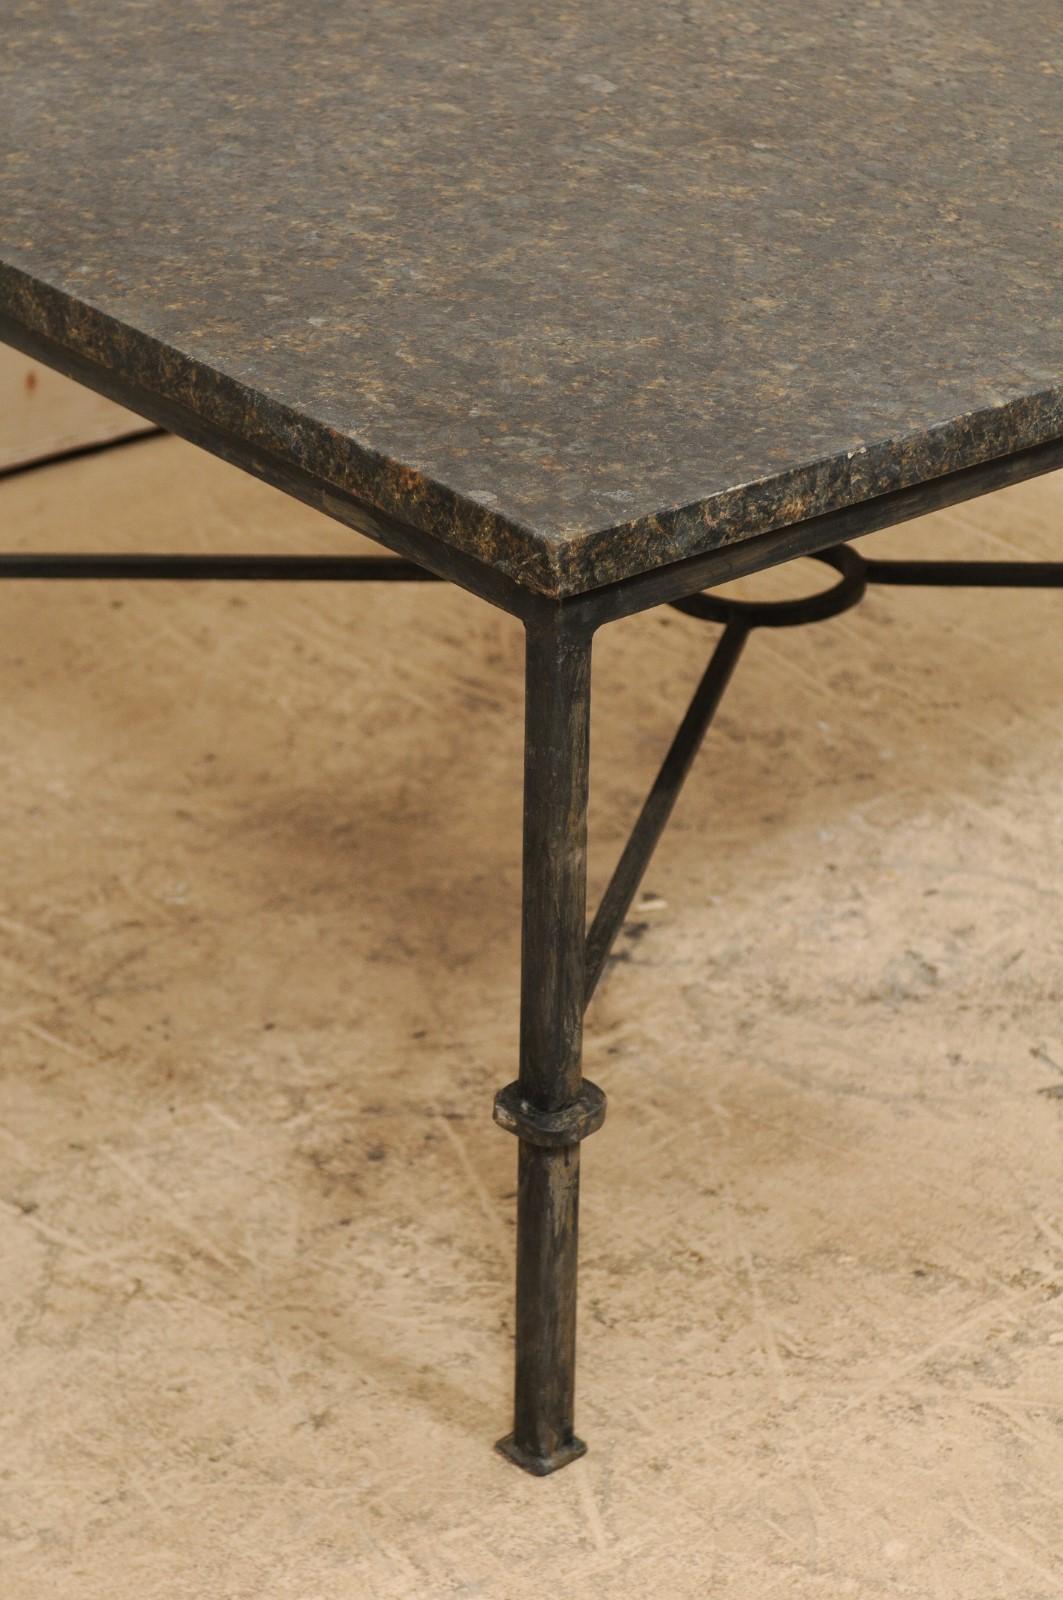 Contemporary Custom Coffee Table with Honed Granite Top and Black Iron Base